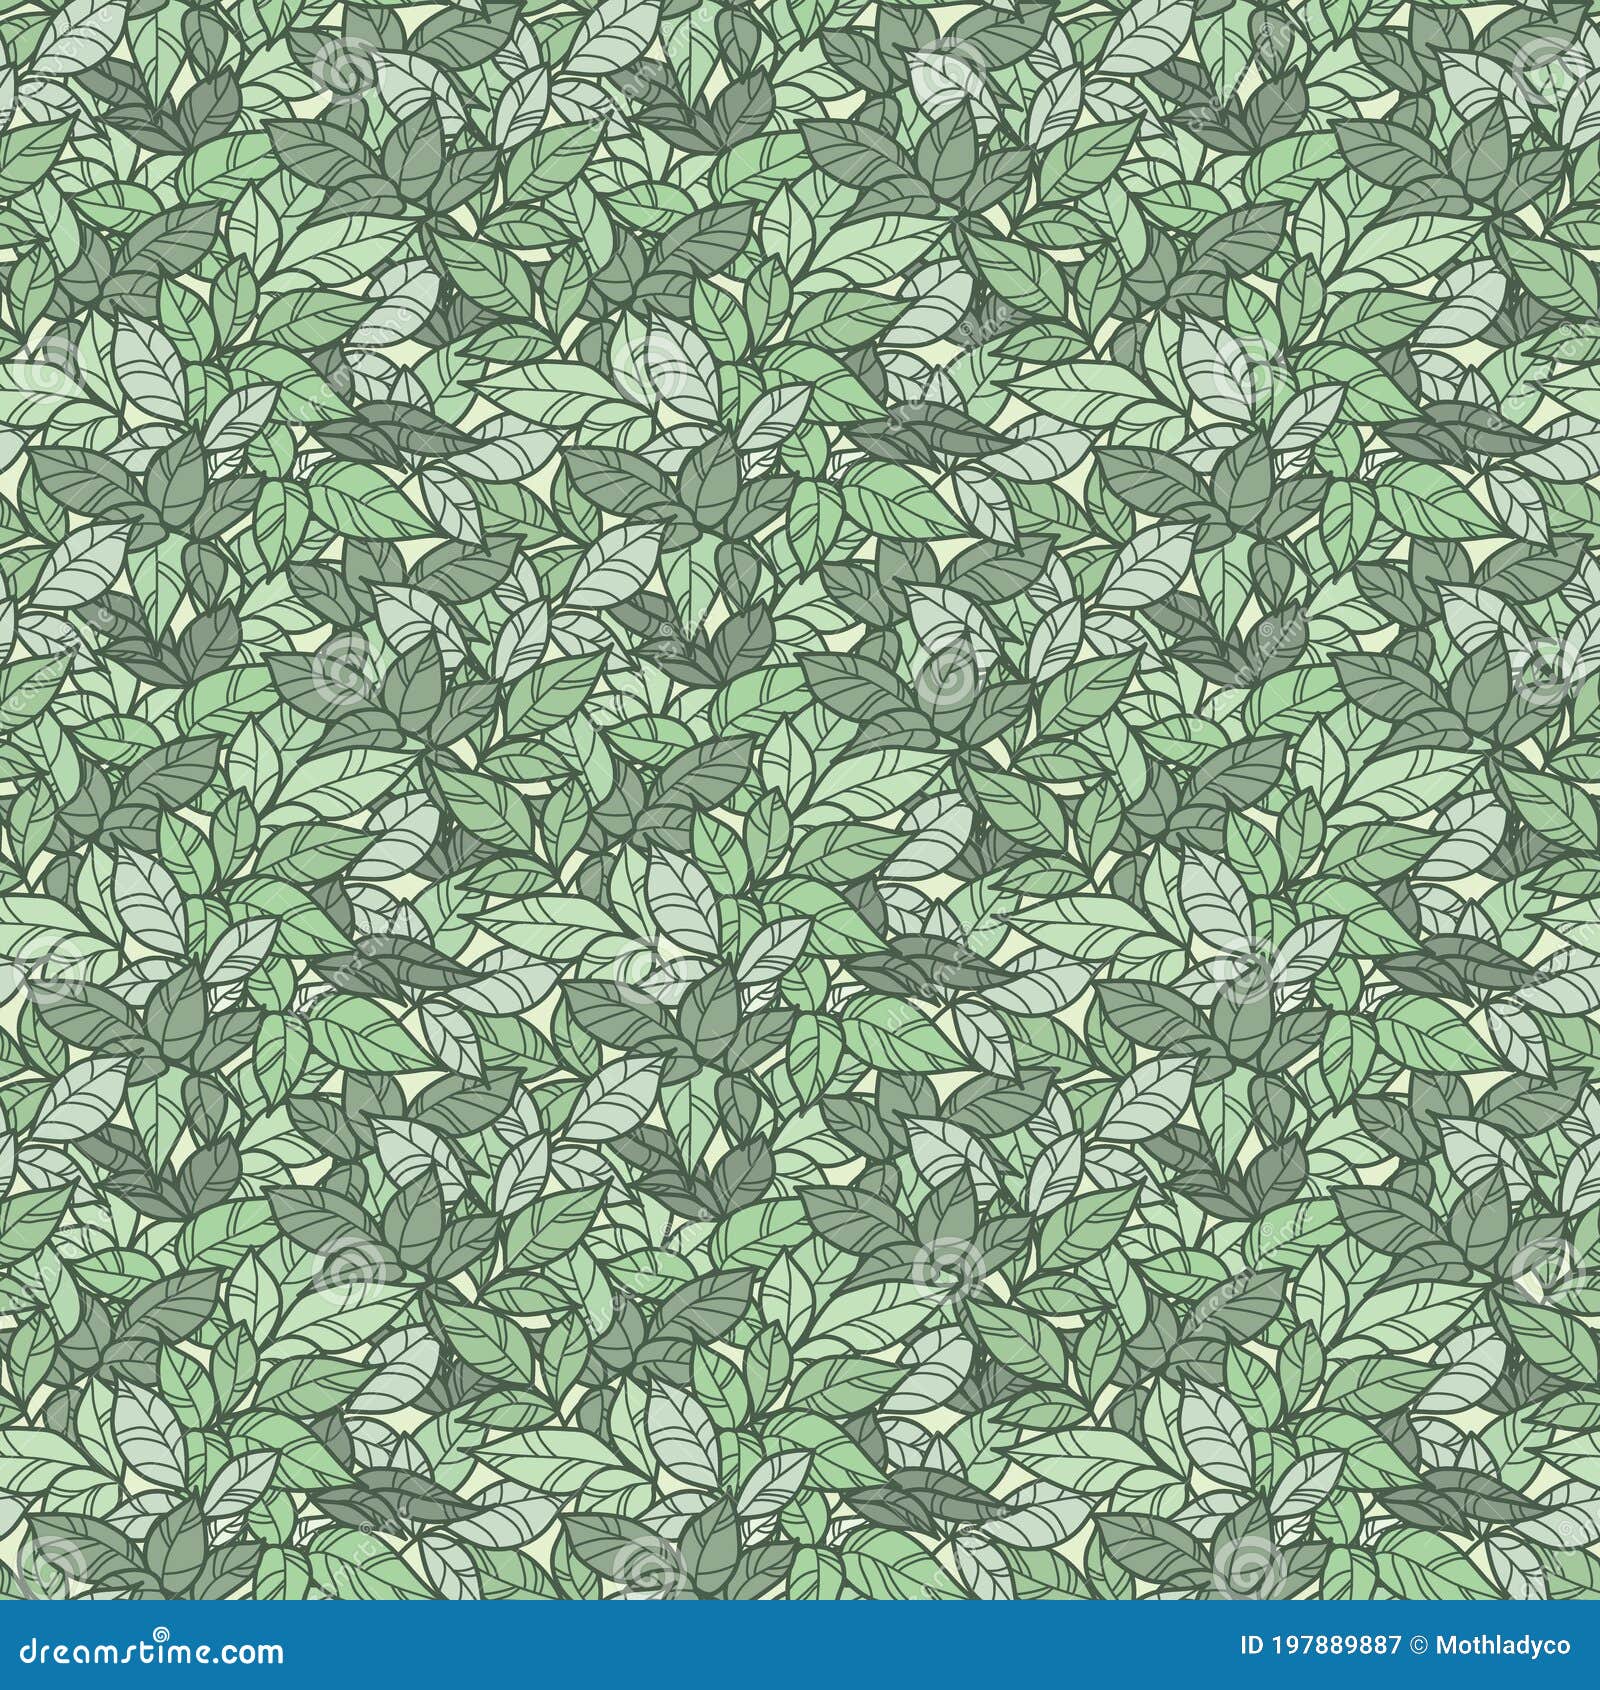 Jungle or Forest Leaves Green Seamless Pattern Vector Design Background ...